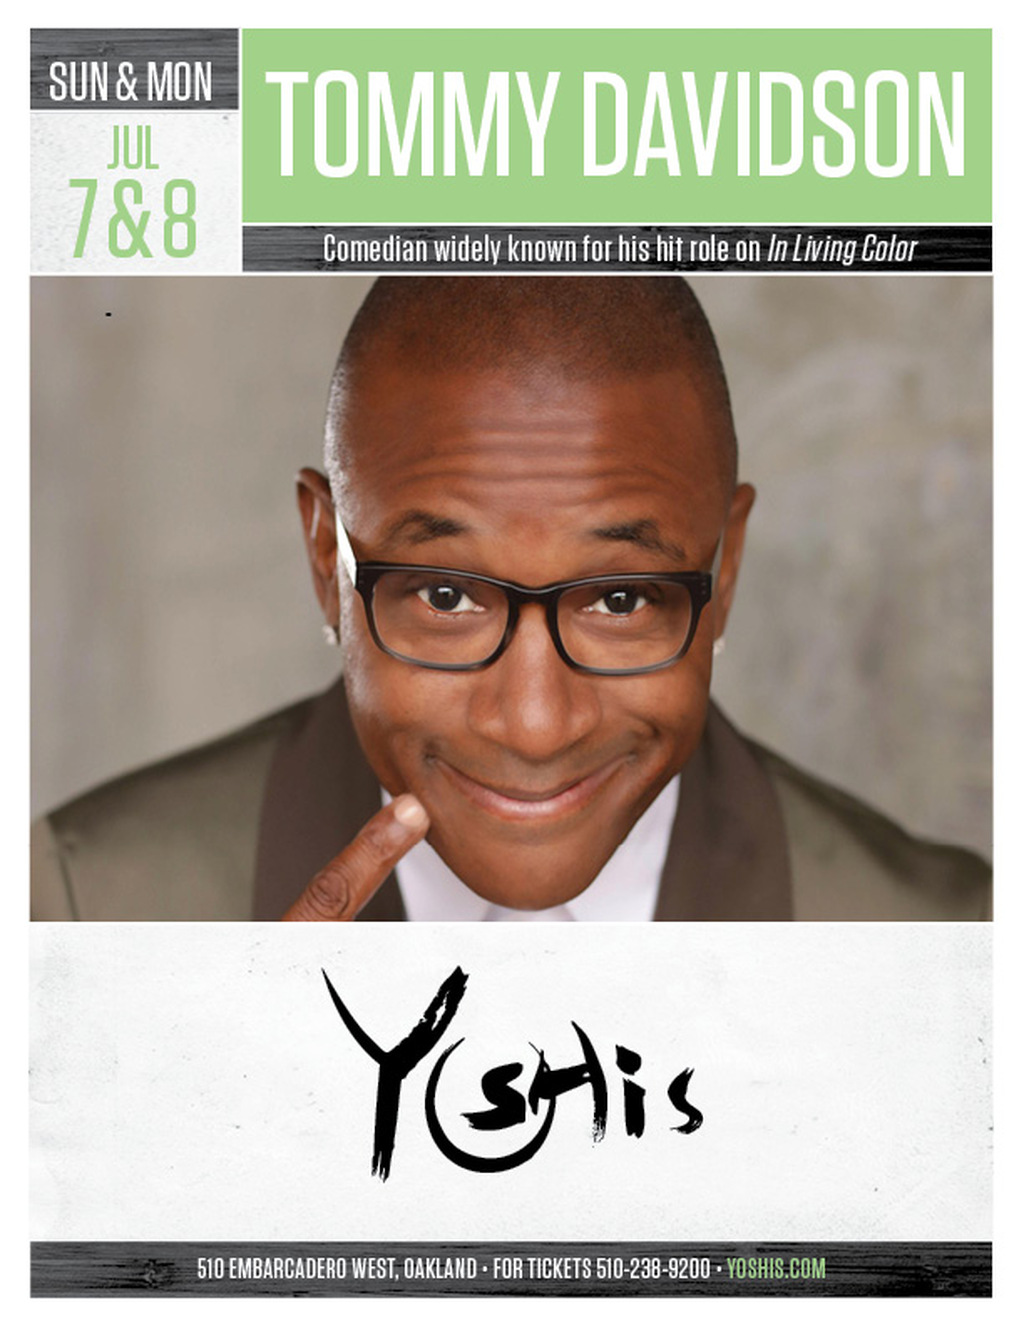 Yoshi s Get Ready to Laugh Out Loud at Yoshi s with Tommy Davidson  promotion flier on Digifli com